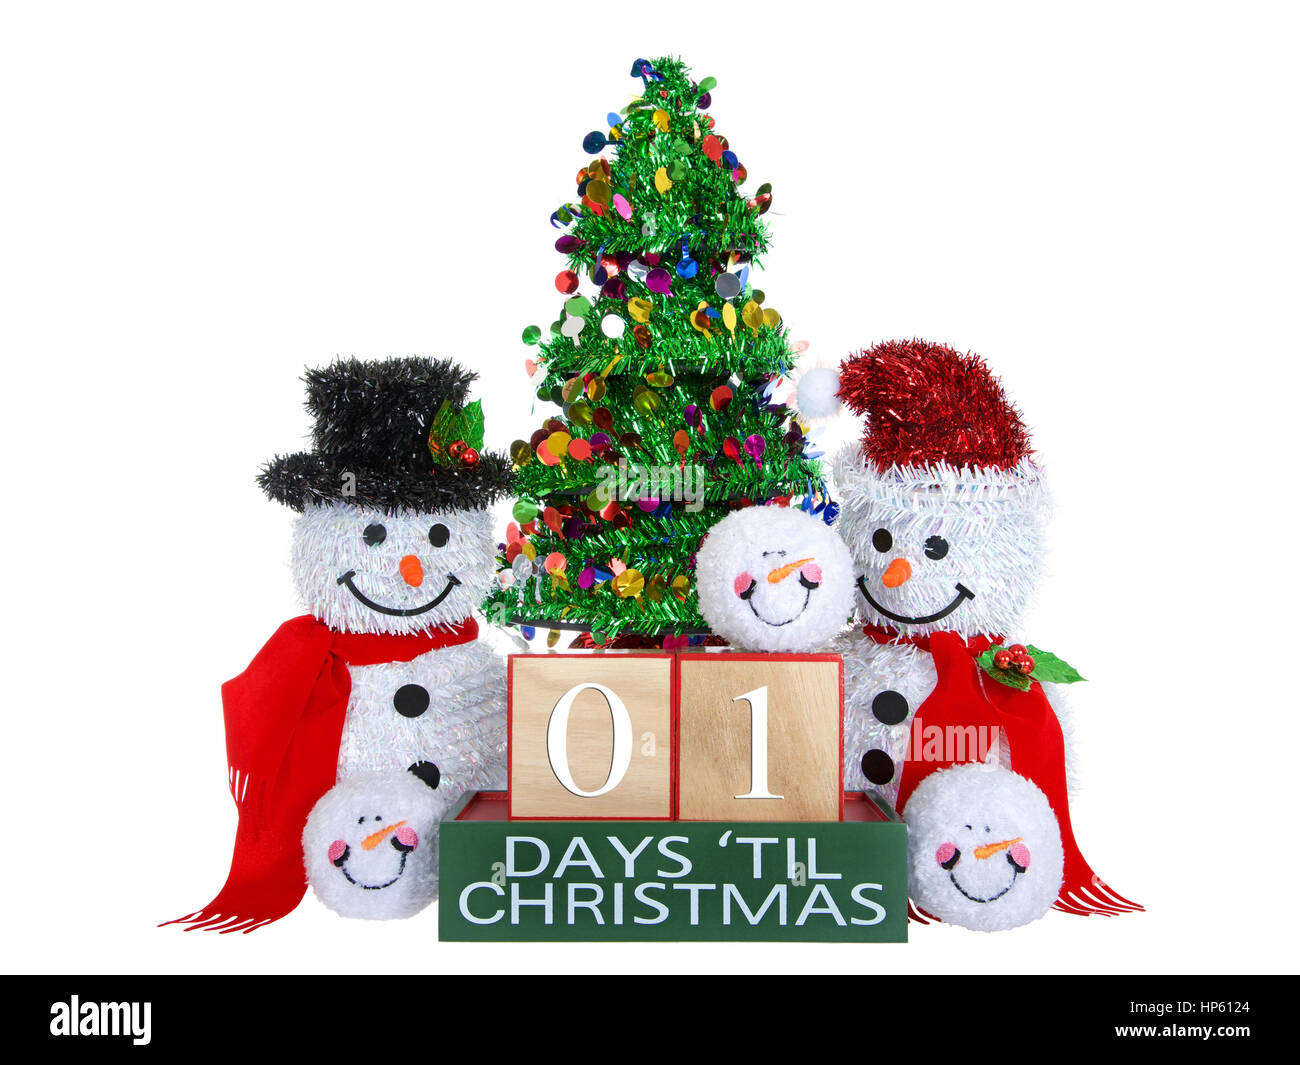 01 Days until Christmas light beech wood blocks with red trim on a green base with tinsel christmas tree, mr and mrs snowman and snowball snowmen head Stock Photo